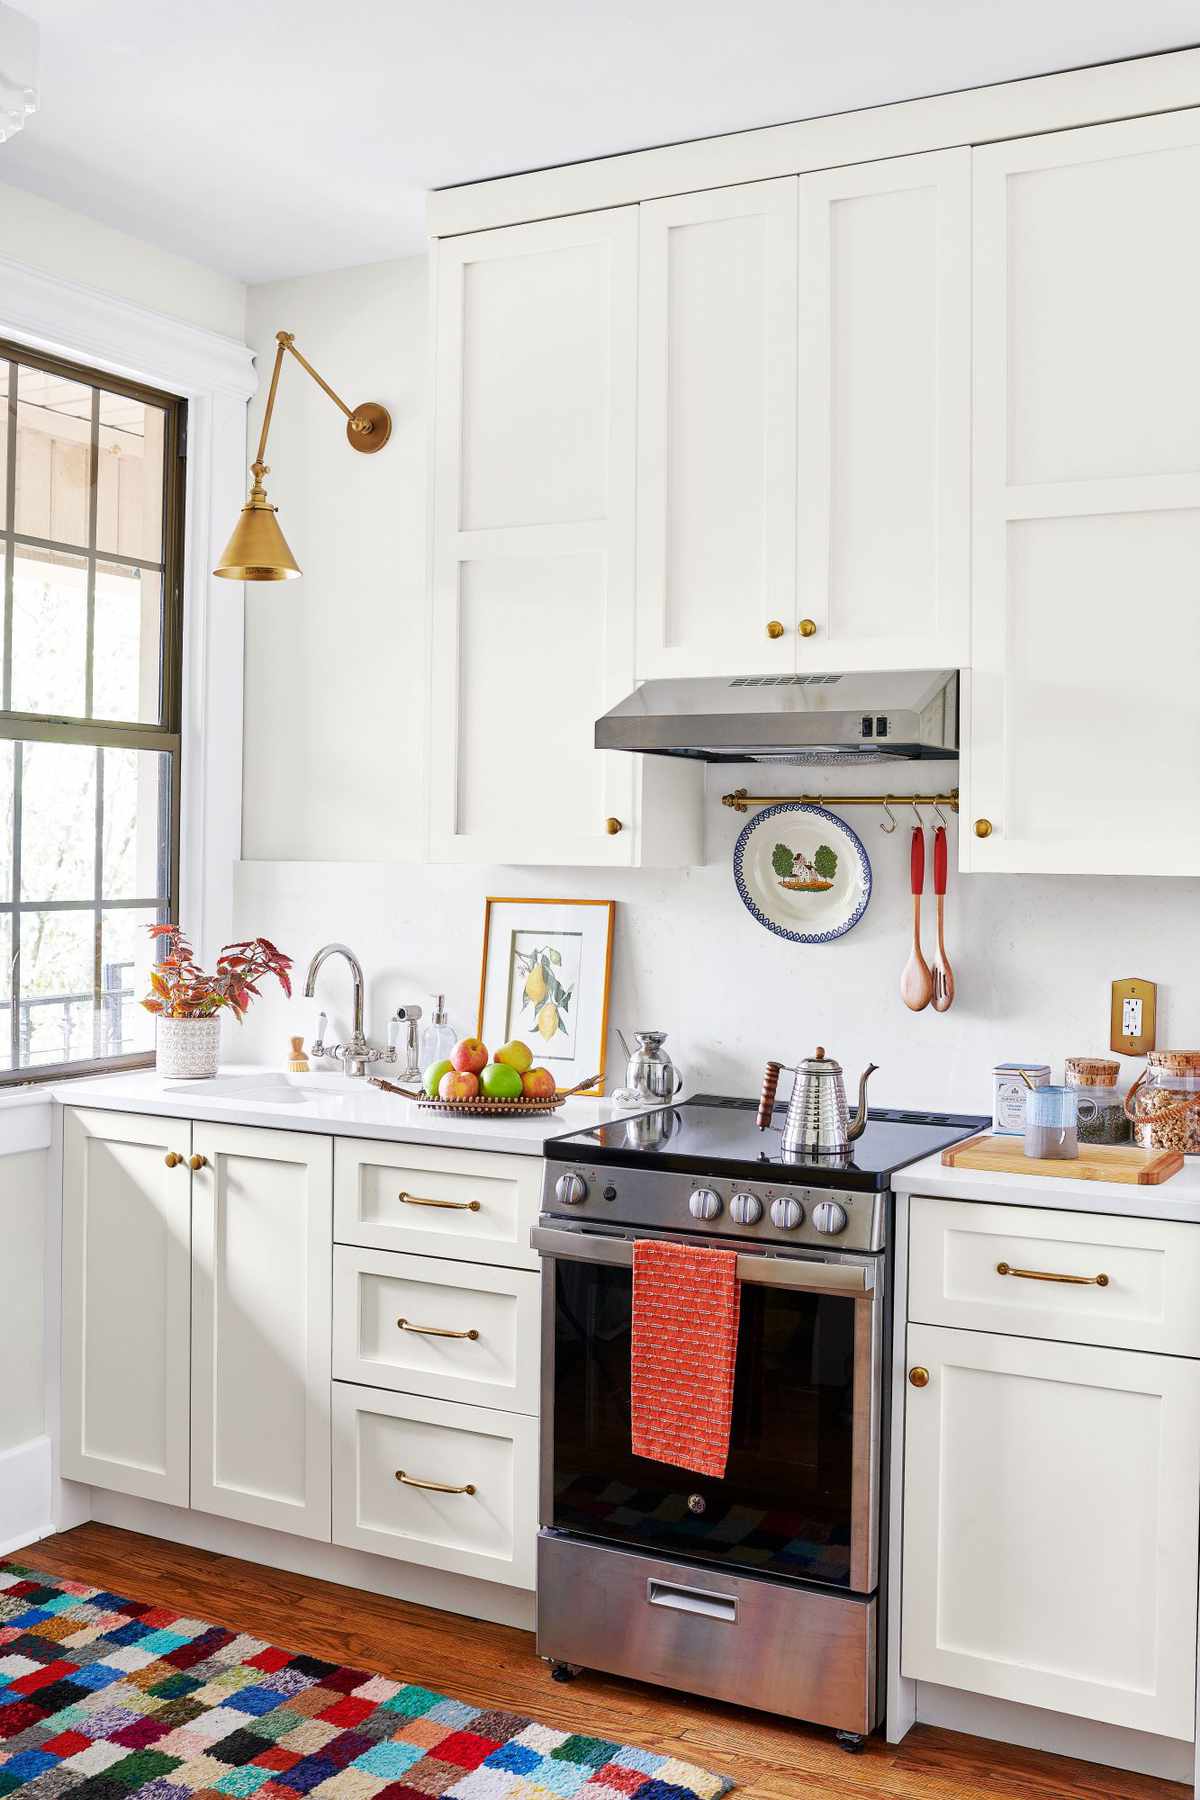 Jessica Stambaugh designed galley kitchen with apartment-size appliances and white cabinetry